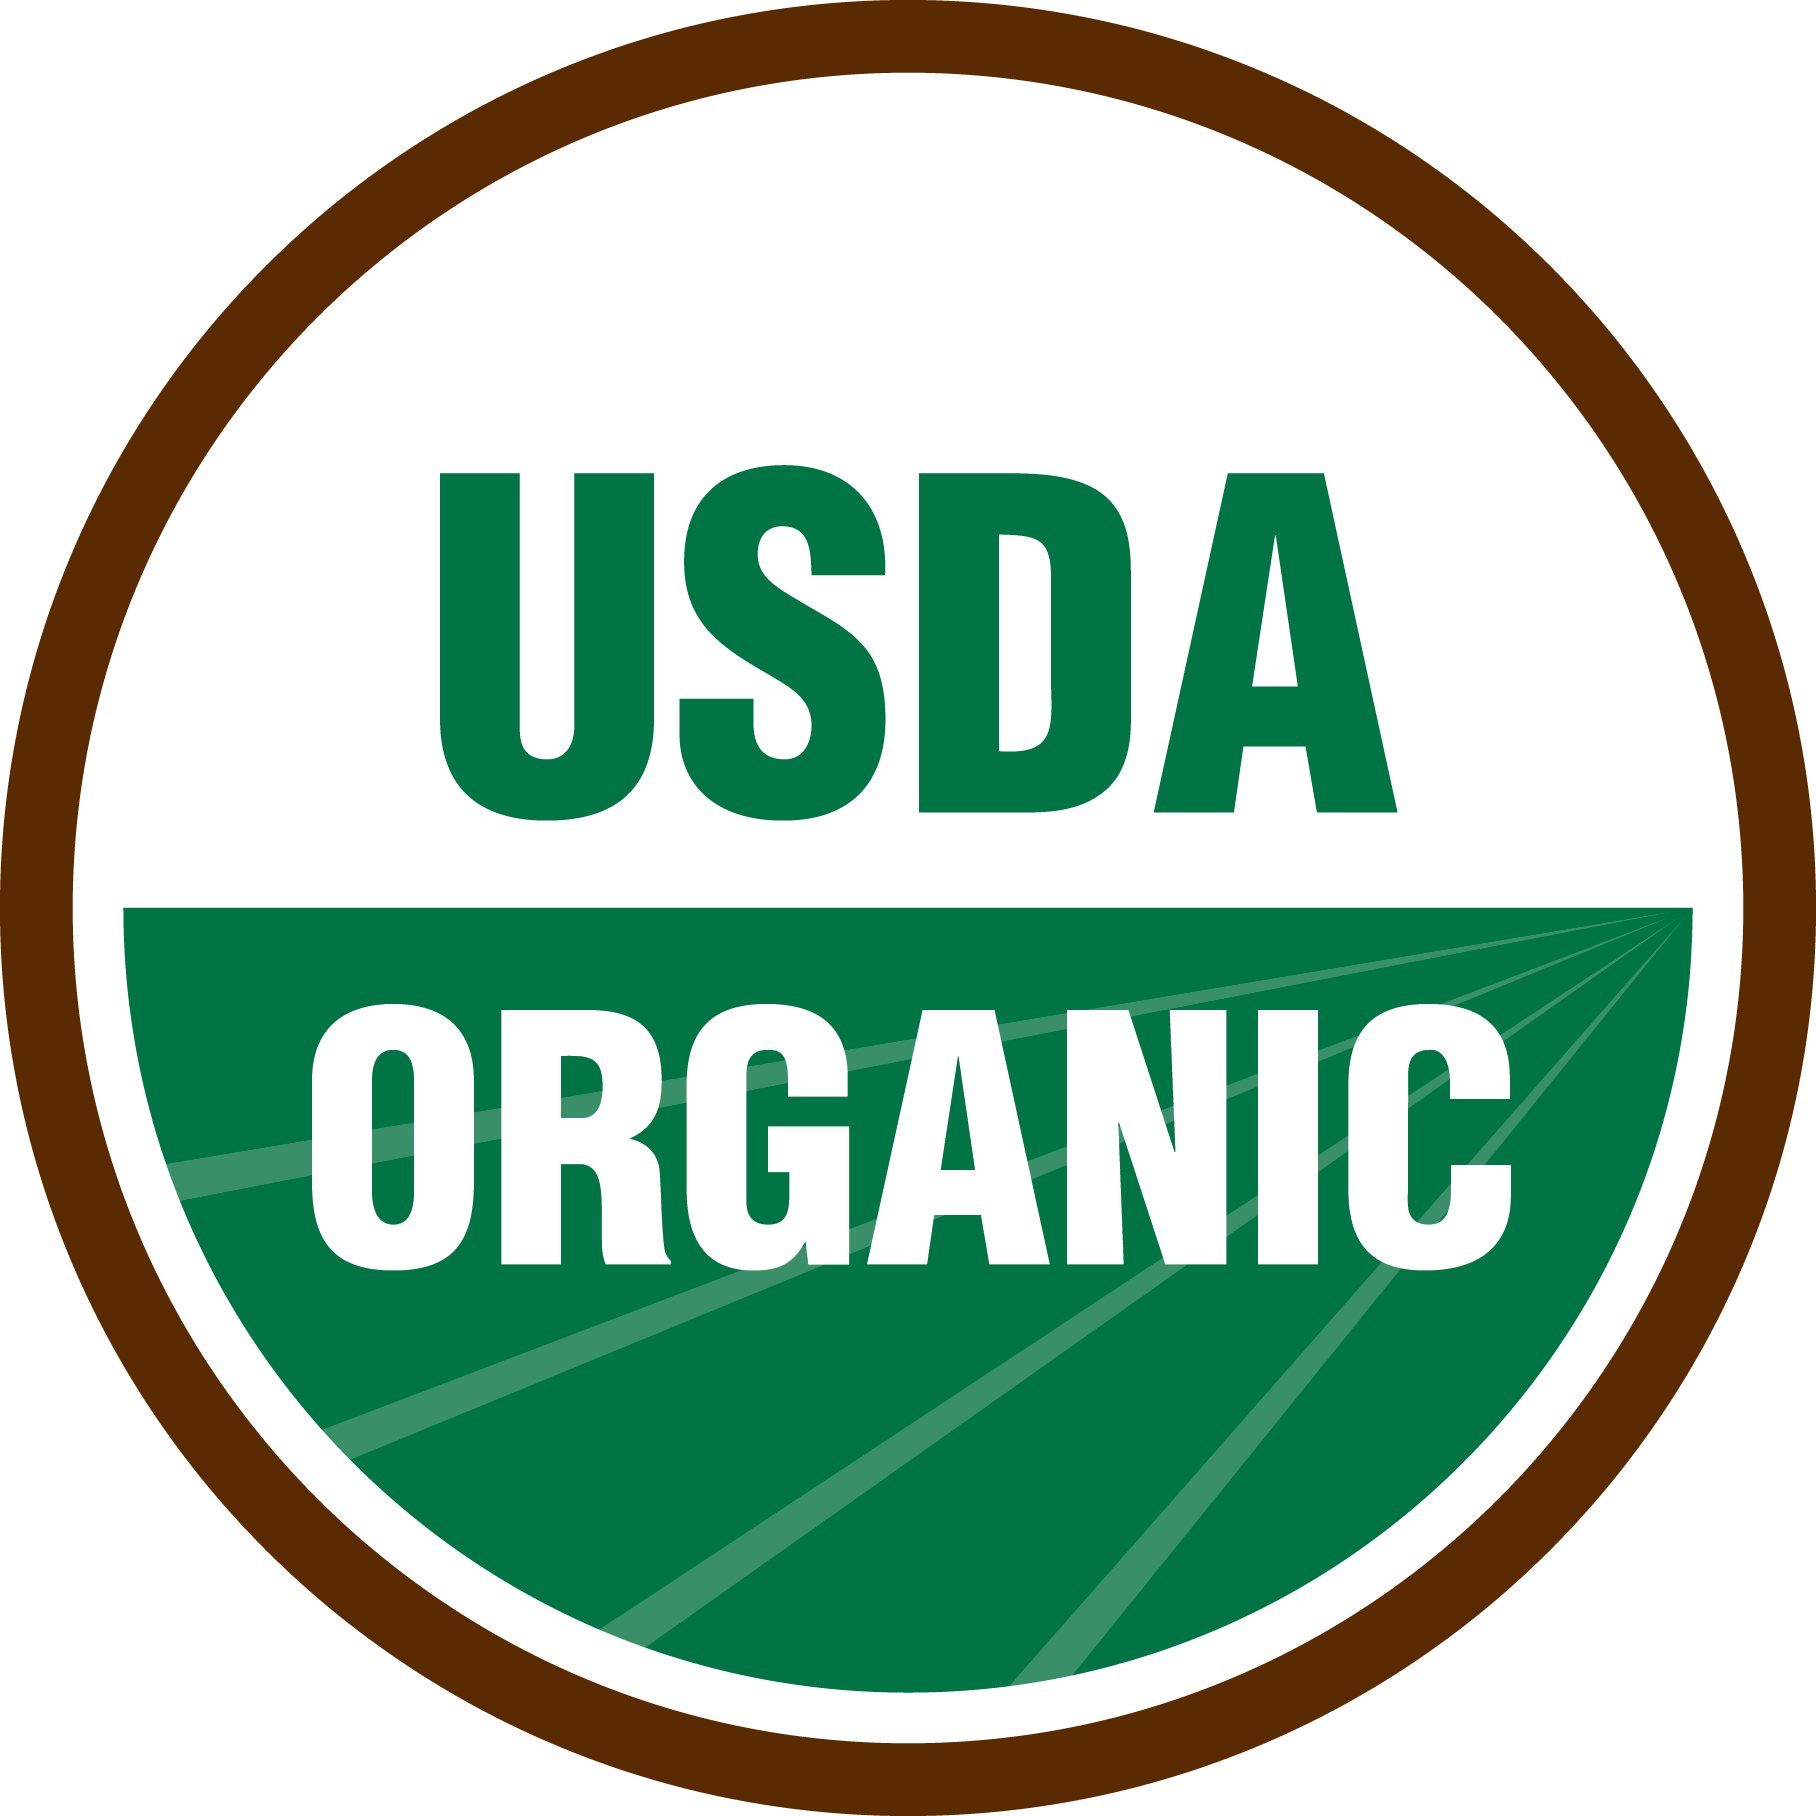 The seal agricultural marketing. Field clipart organic